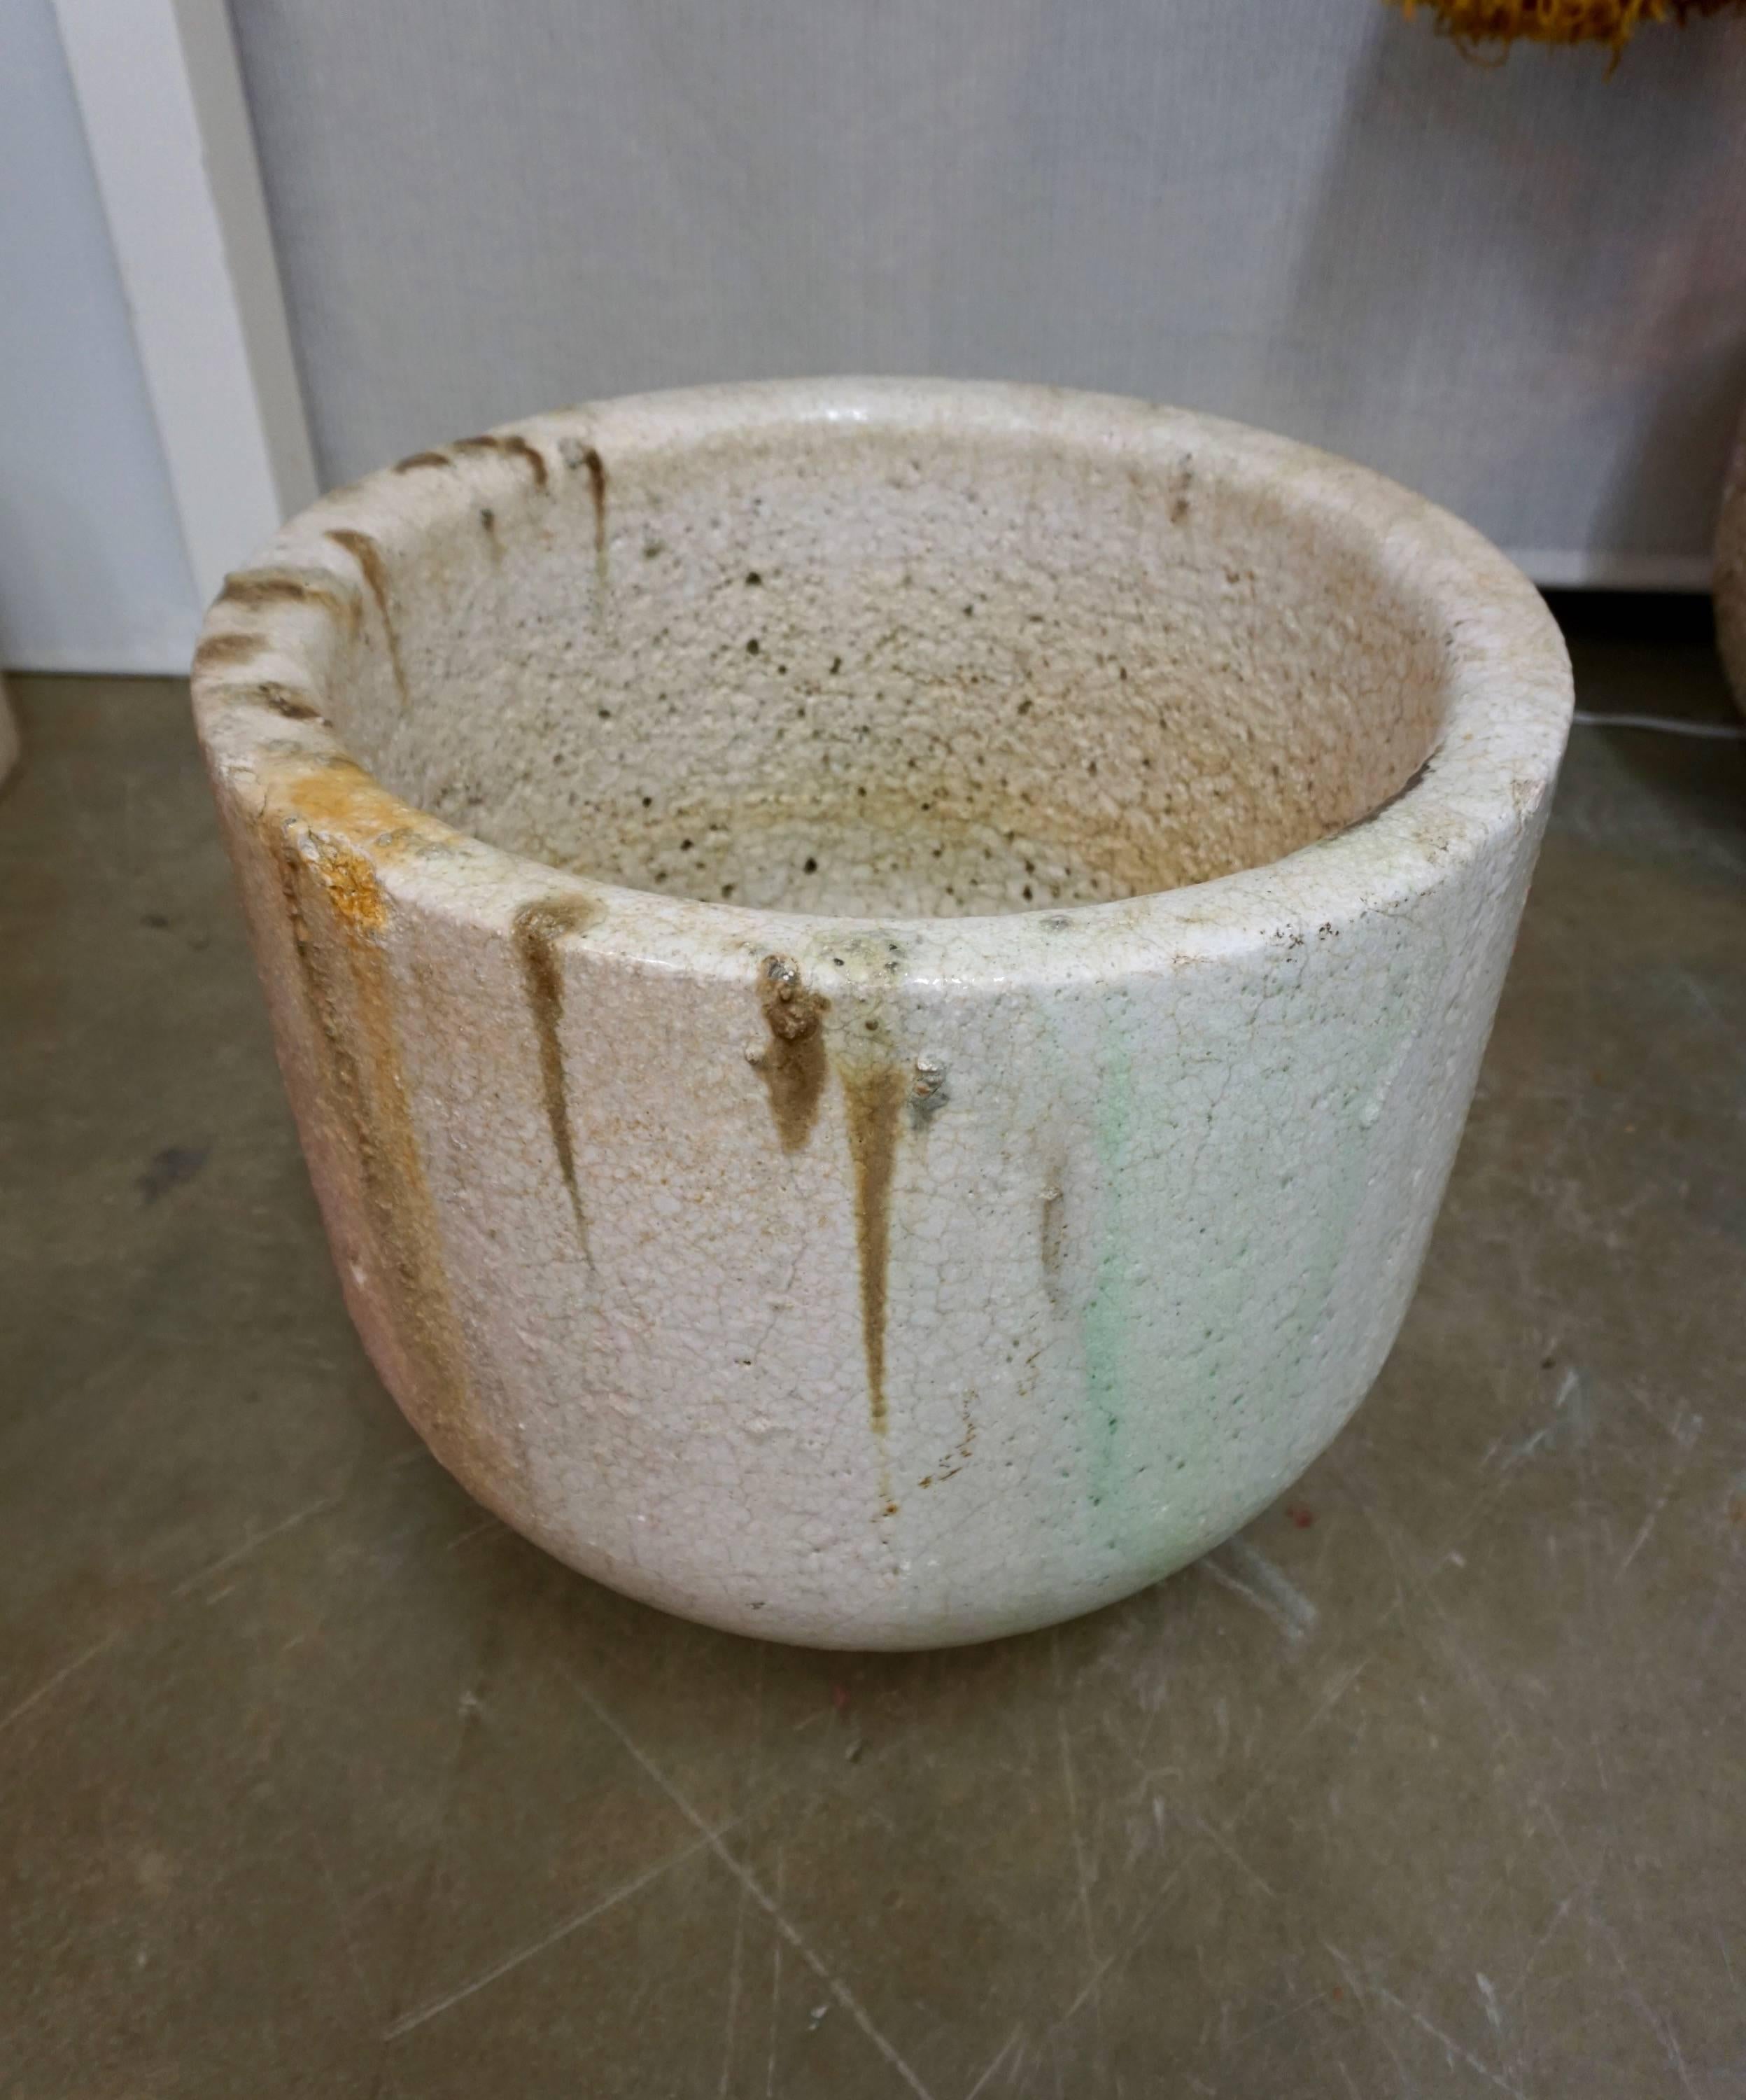 Ceramic vessel used by glaziers and glass blowers to melt glass at very high temperatures. Enhanced by the crackling, glass remnants and drippings. Can be used as a planter or decorative object, indoors or outdoors.
Multiple crucibles available.